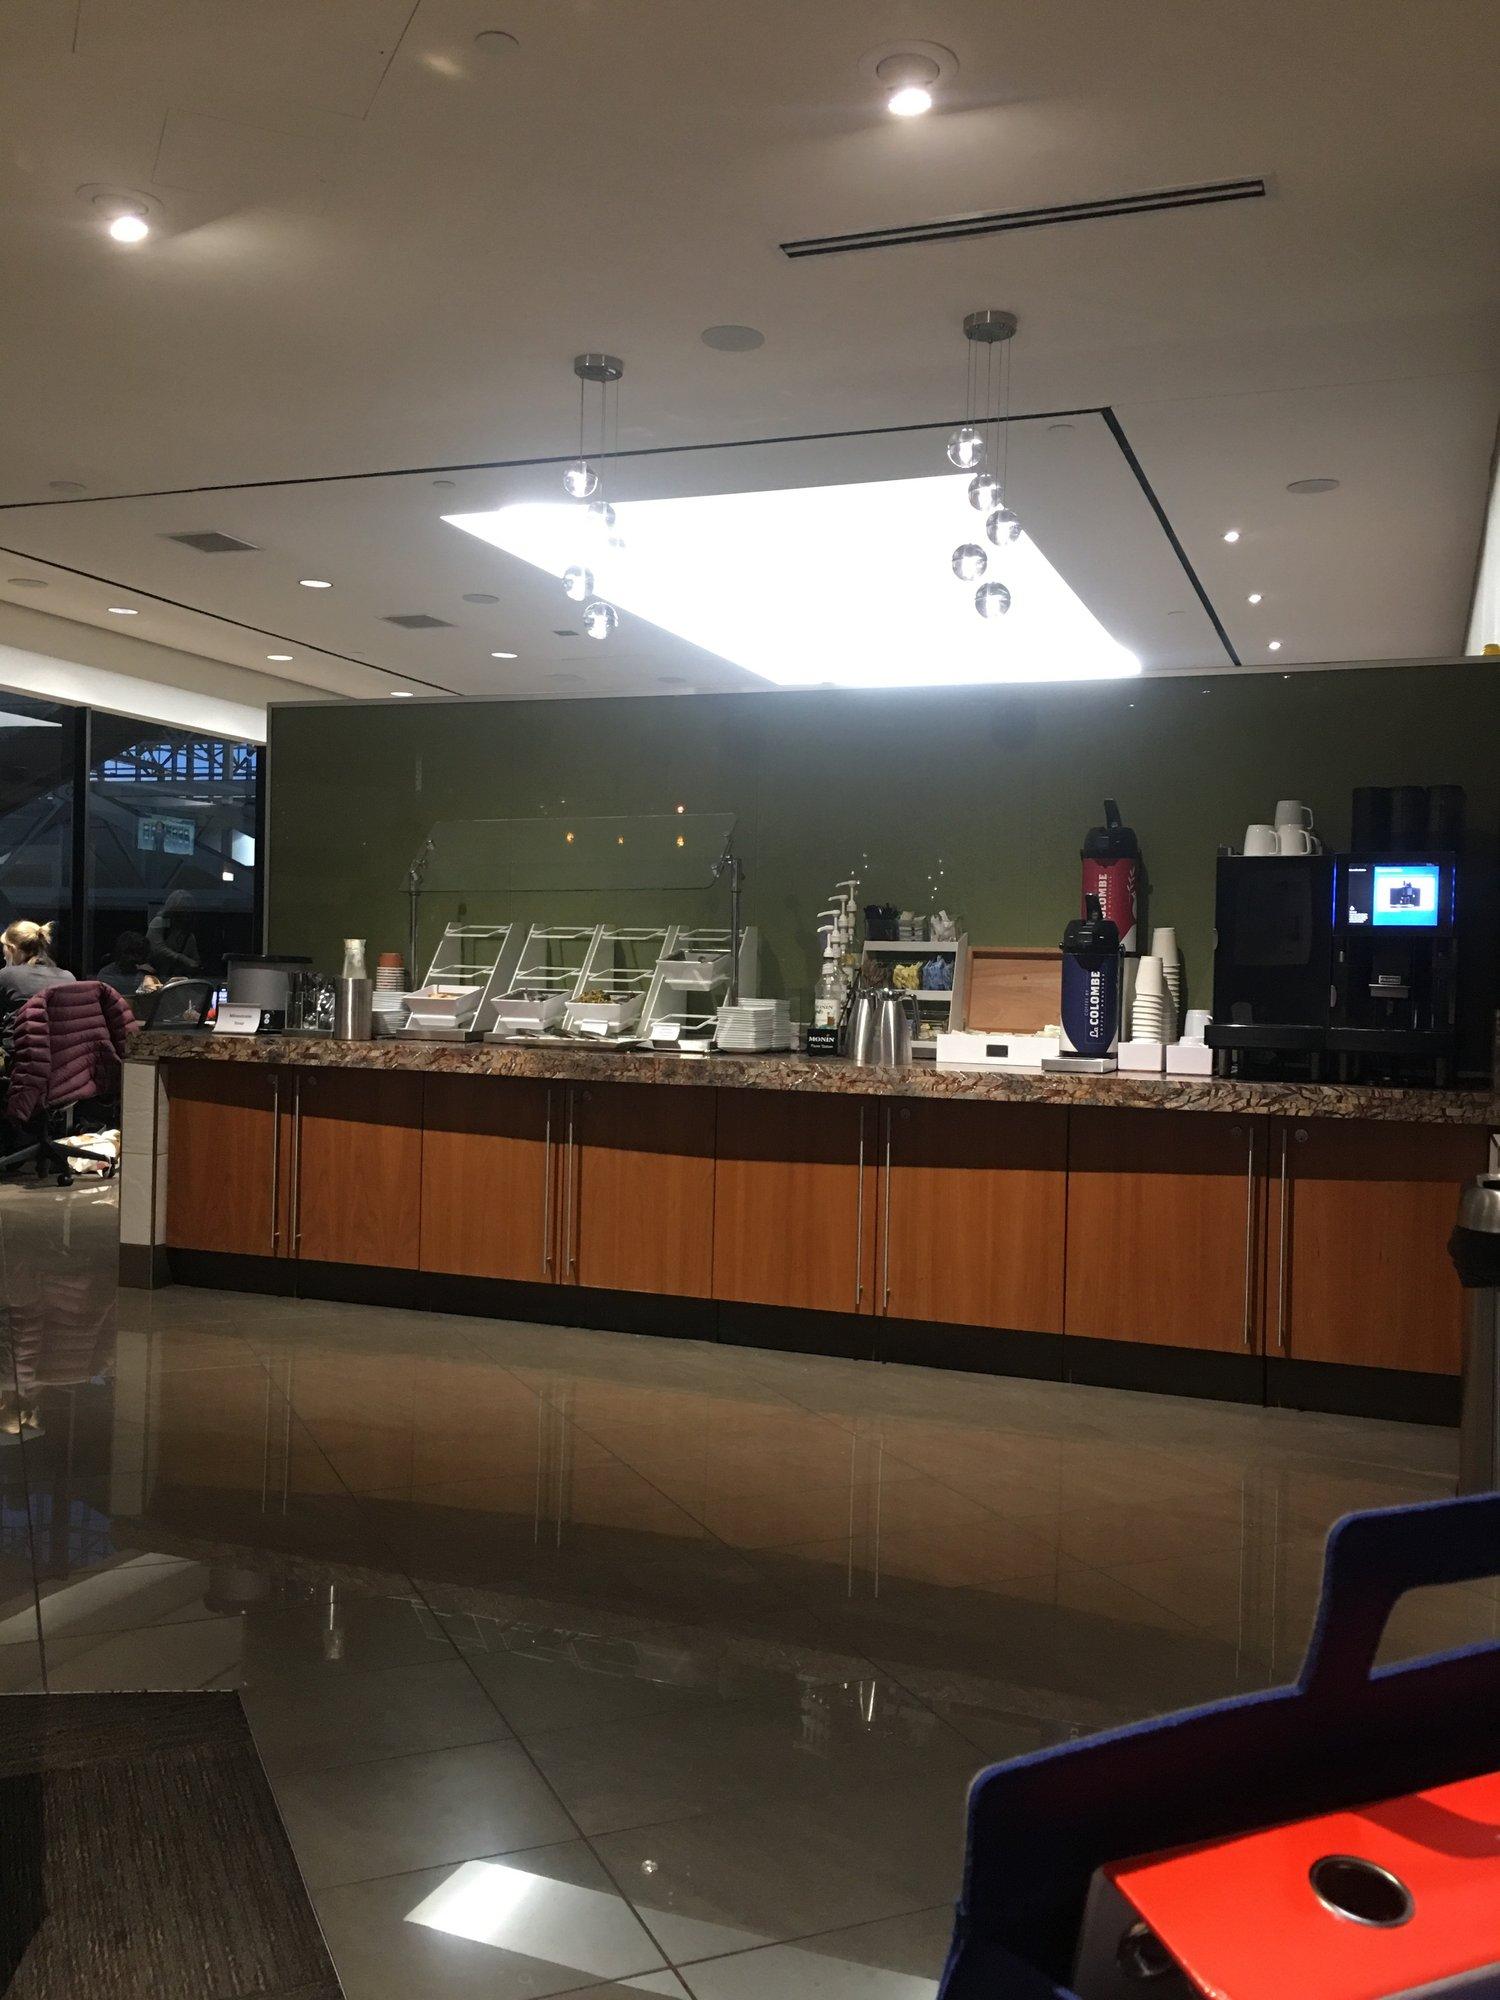 American Airlines Admirals Club image 12 of 12